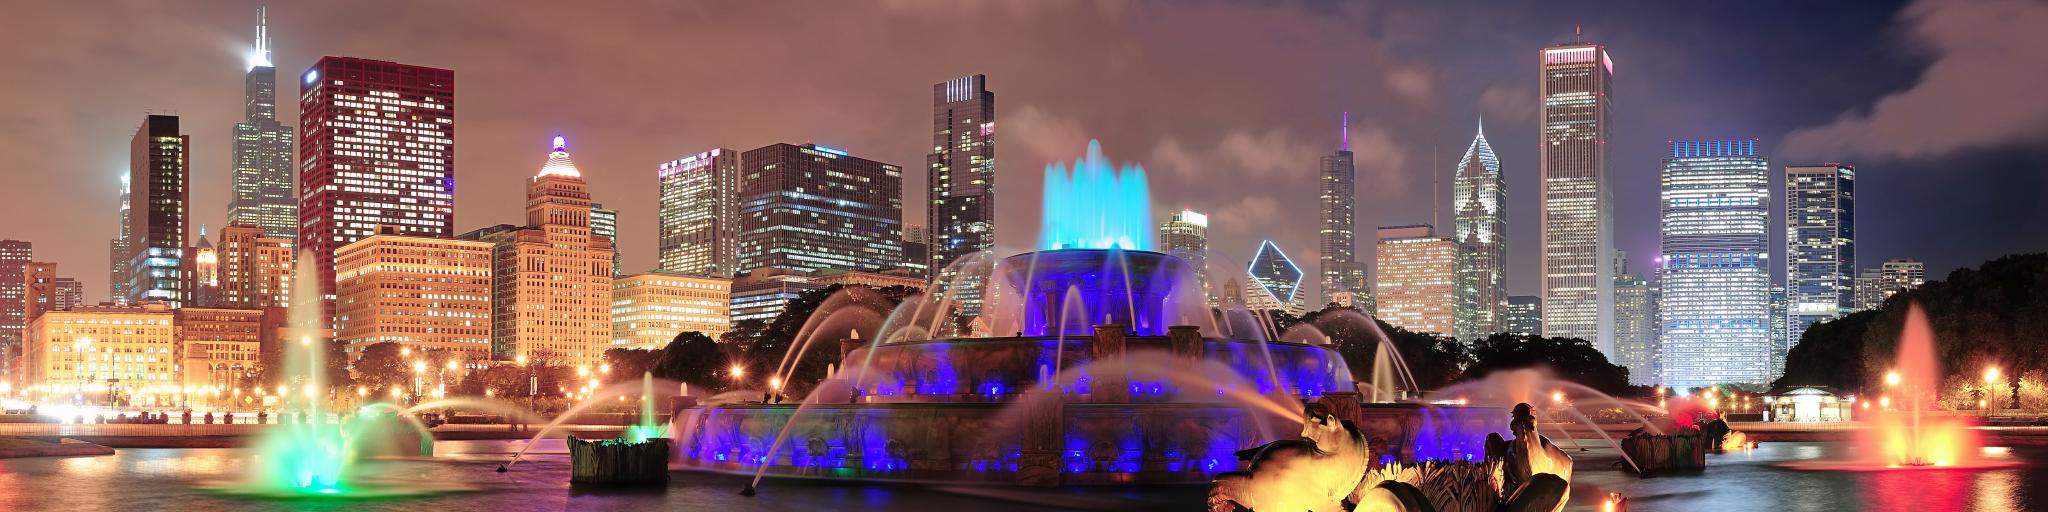 A panoramic view of night-lit and skyscrapers of Chicago with Buckingham fountain in Grant Park at the front